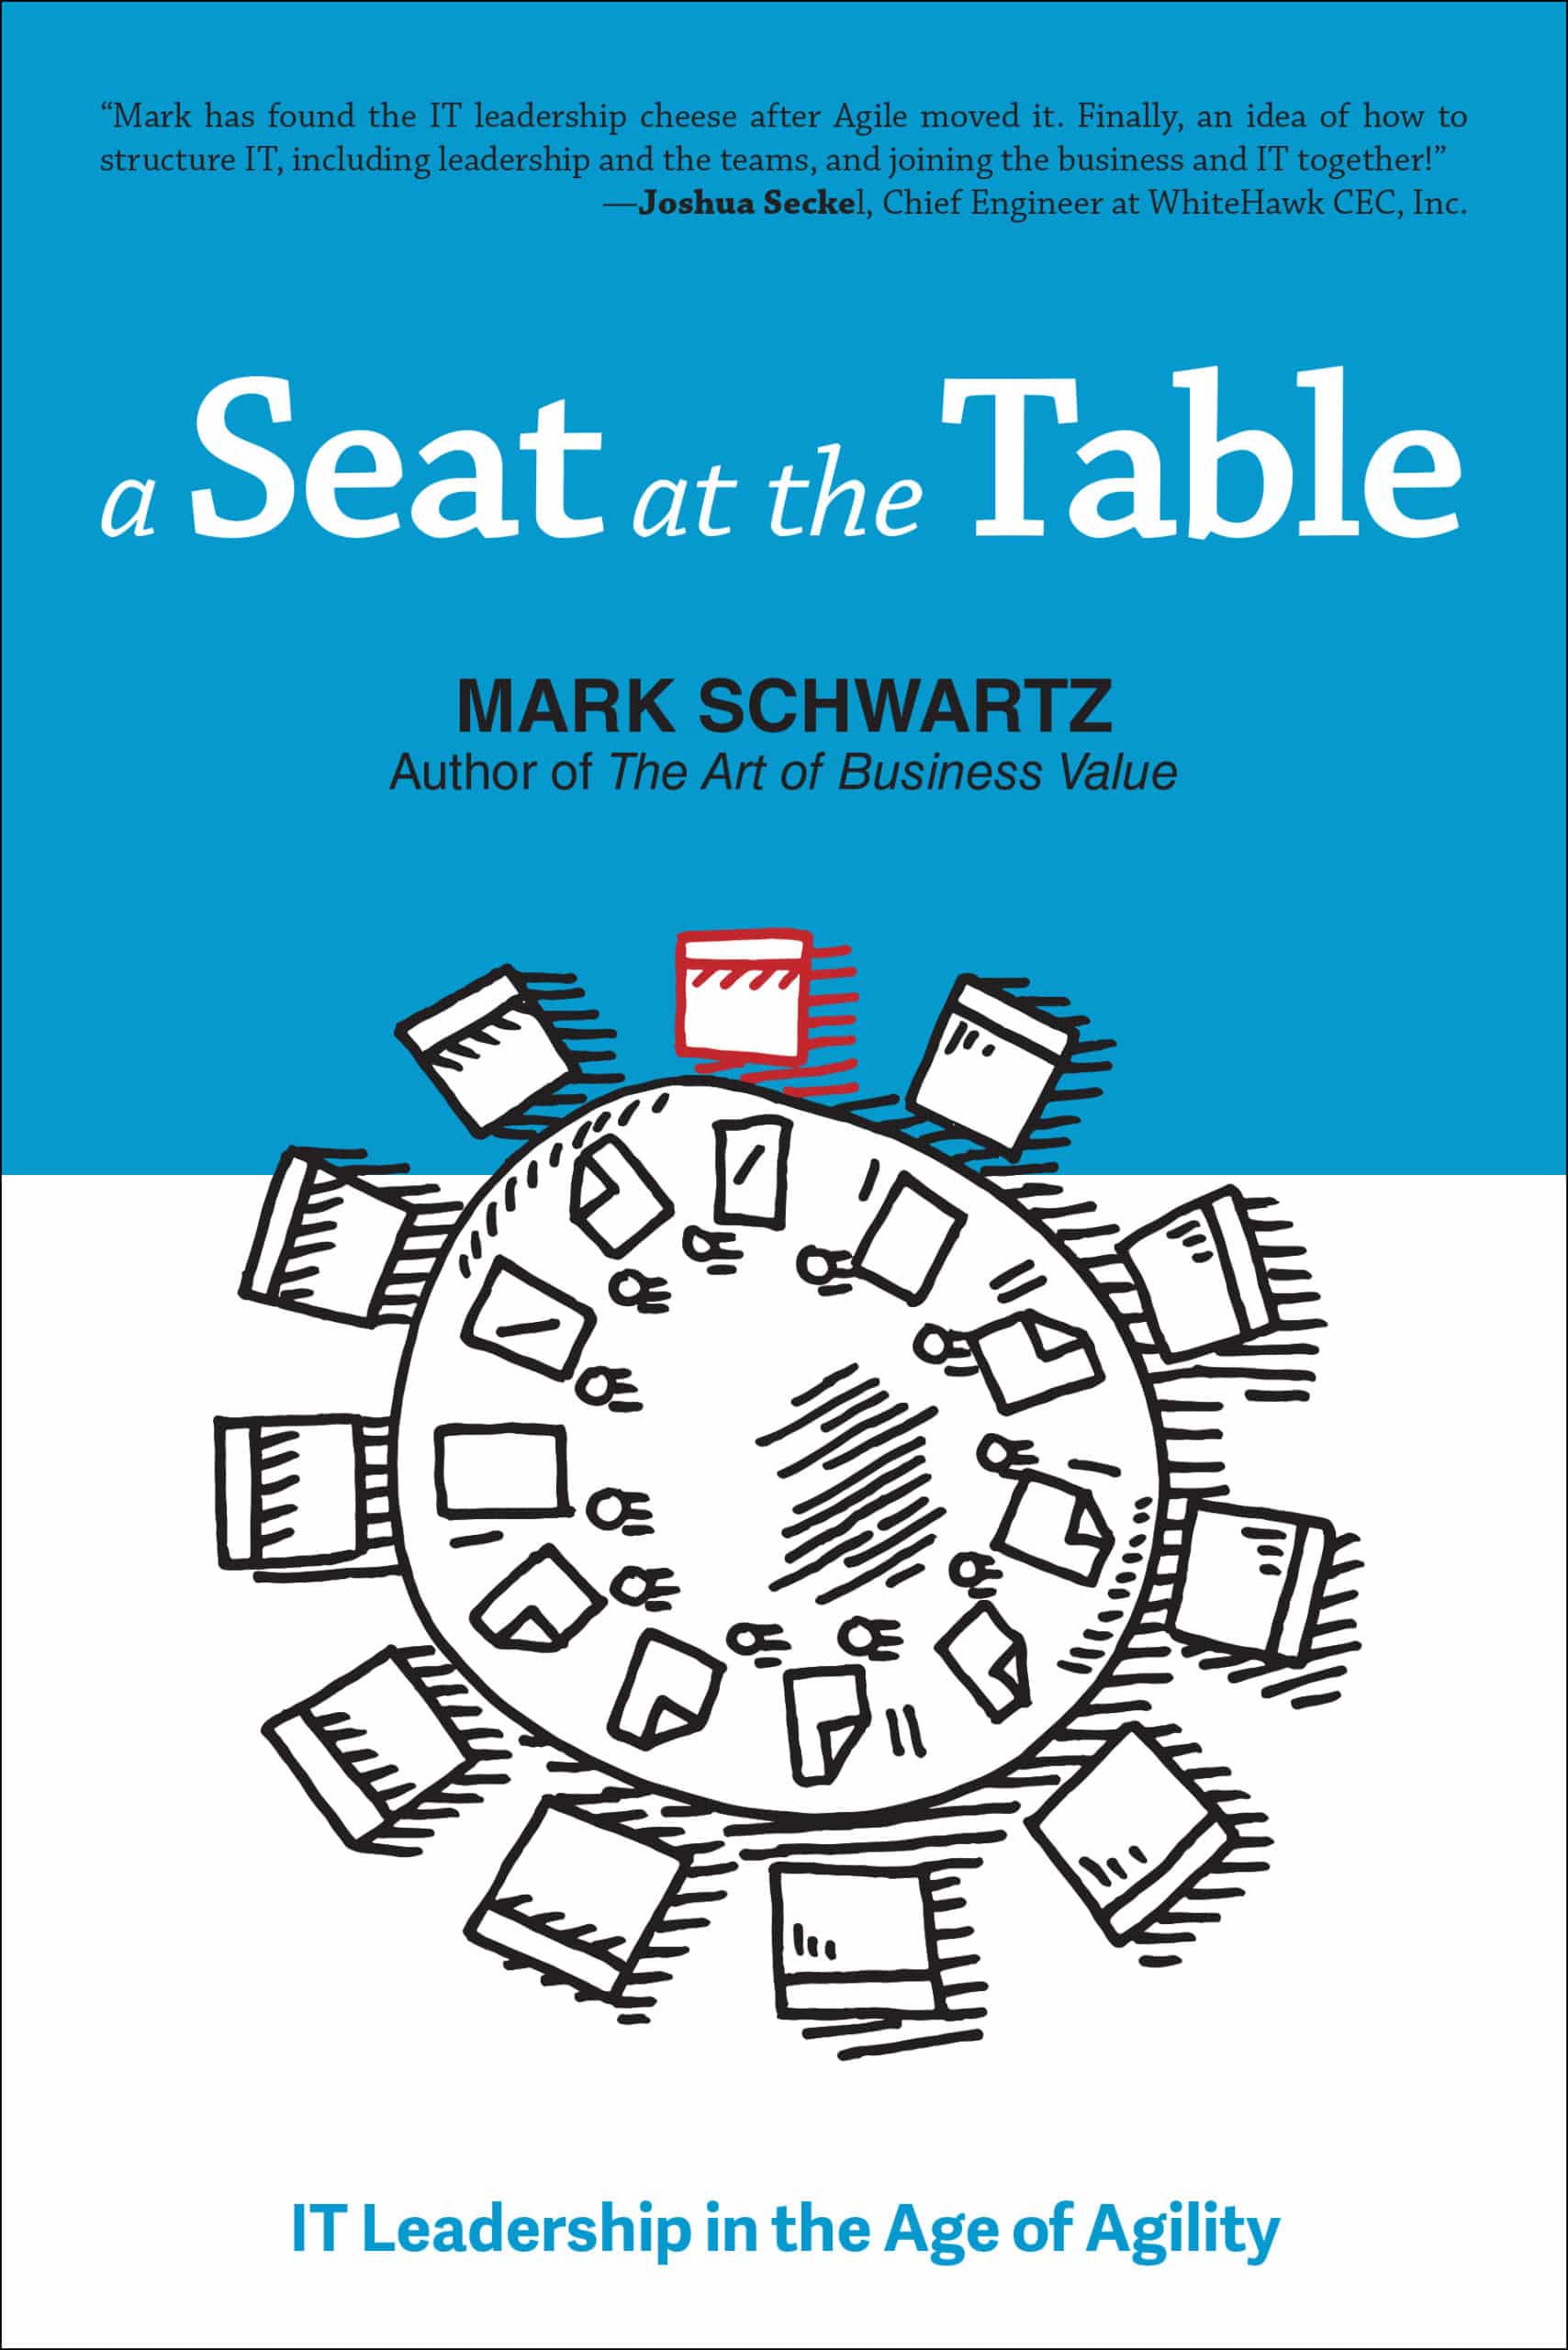 Cover of A Seat at the Table: IT Leadership in the Age of Agility by Mark Schwartz, with offers advice for modern CIOs.